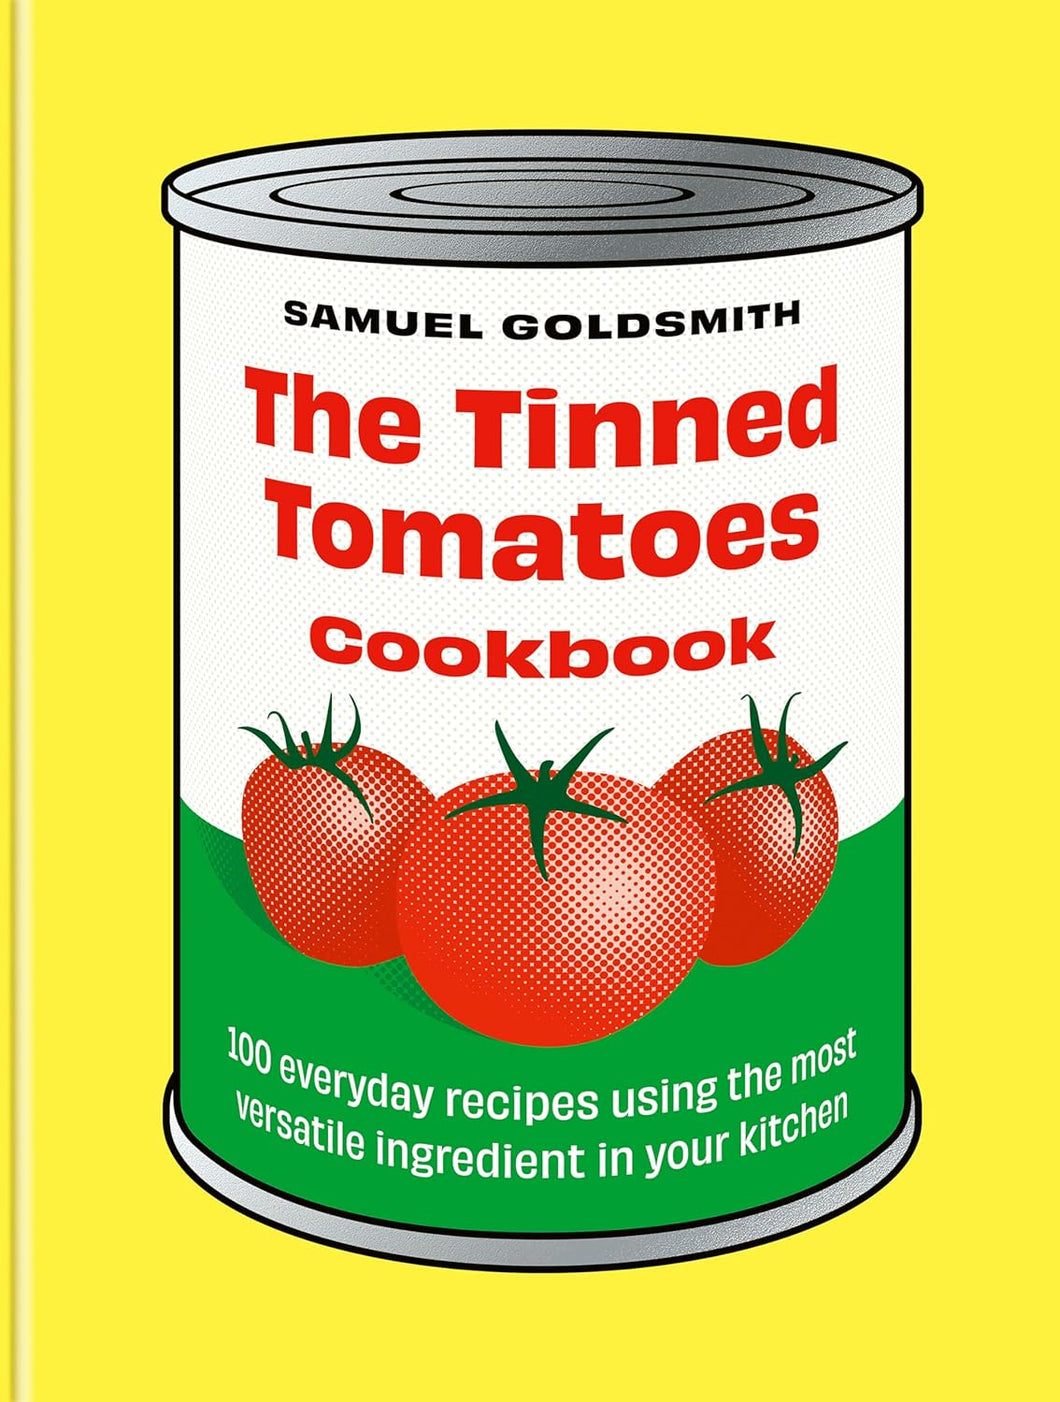 The Tinned Tomatoes Cookbook: 100 everyday recipes using the most versatile ingredient in your kitchen by Samuel Goldsmith